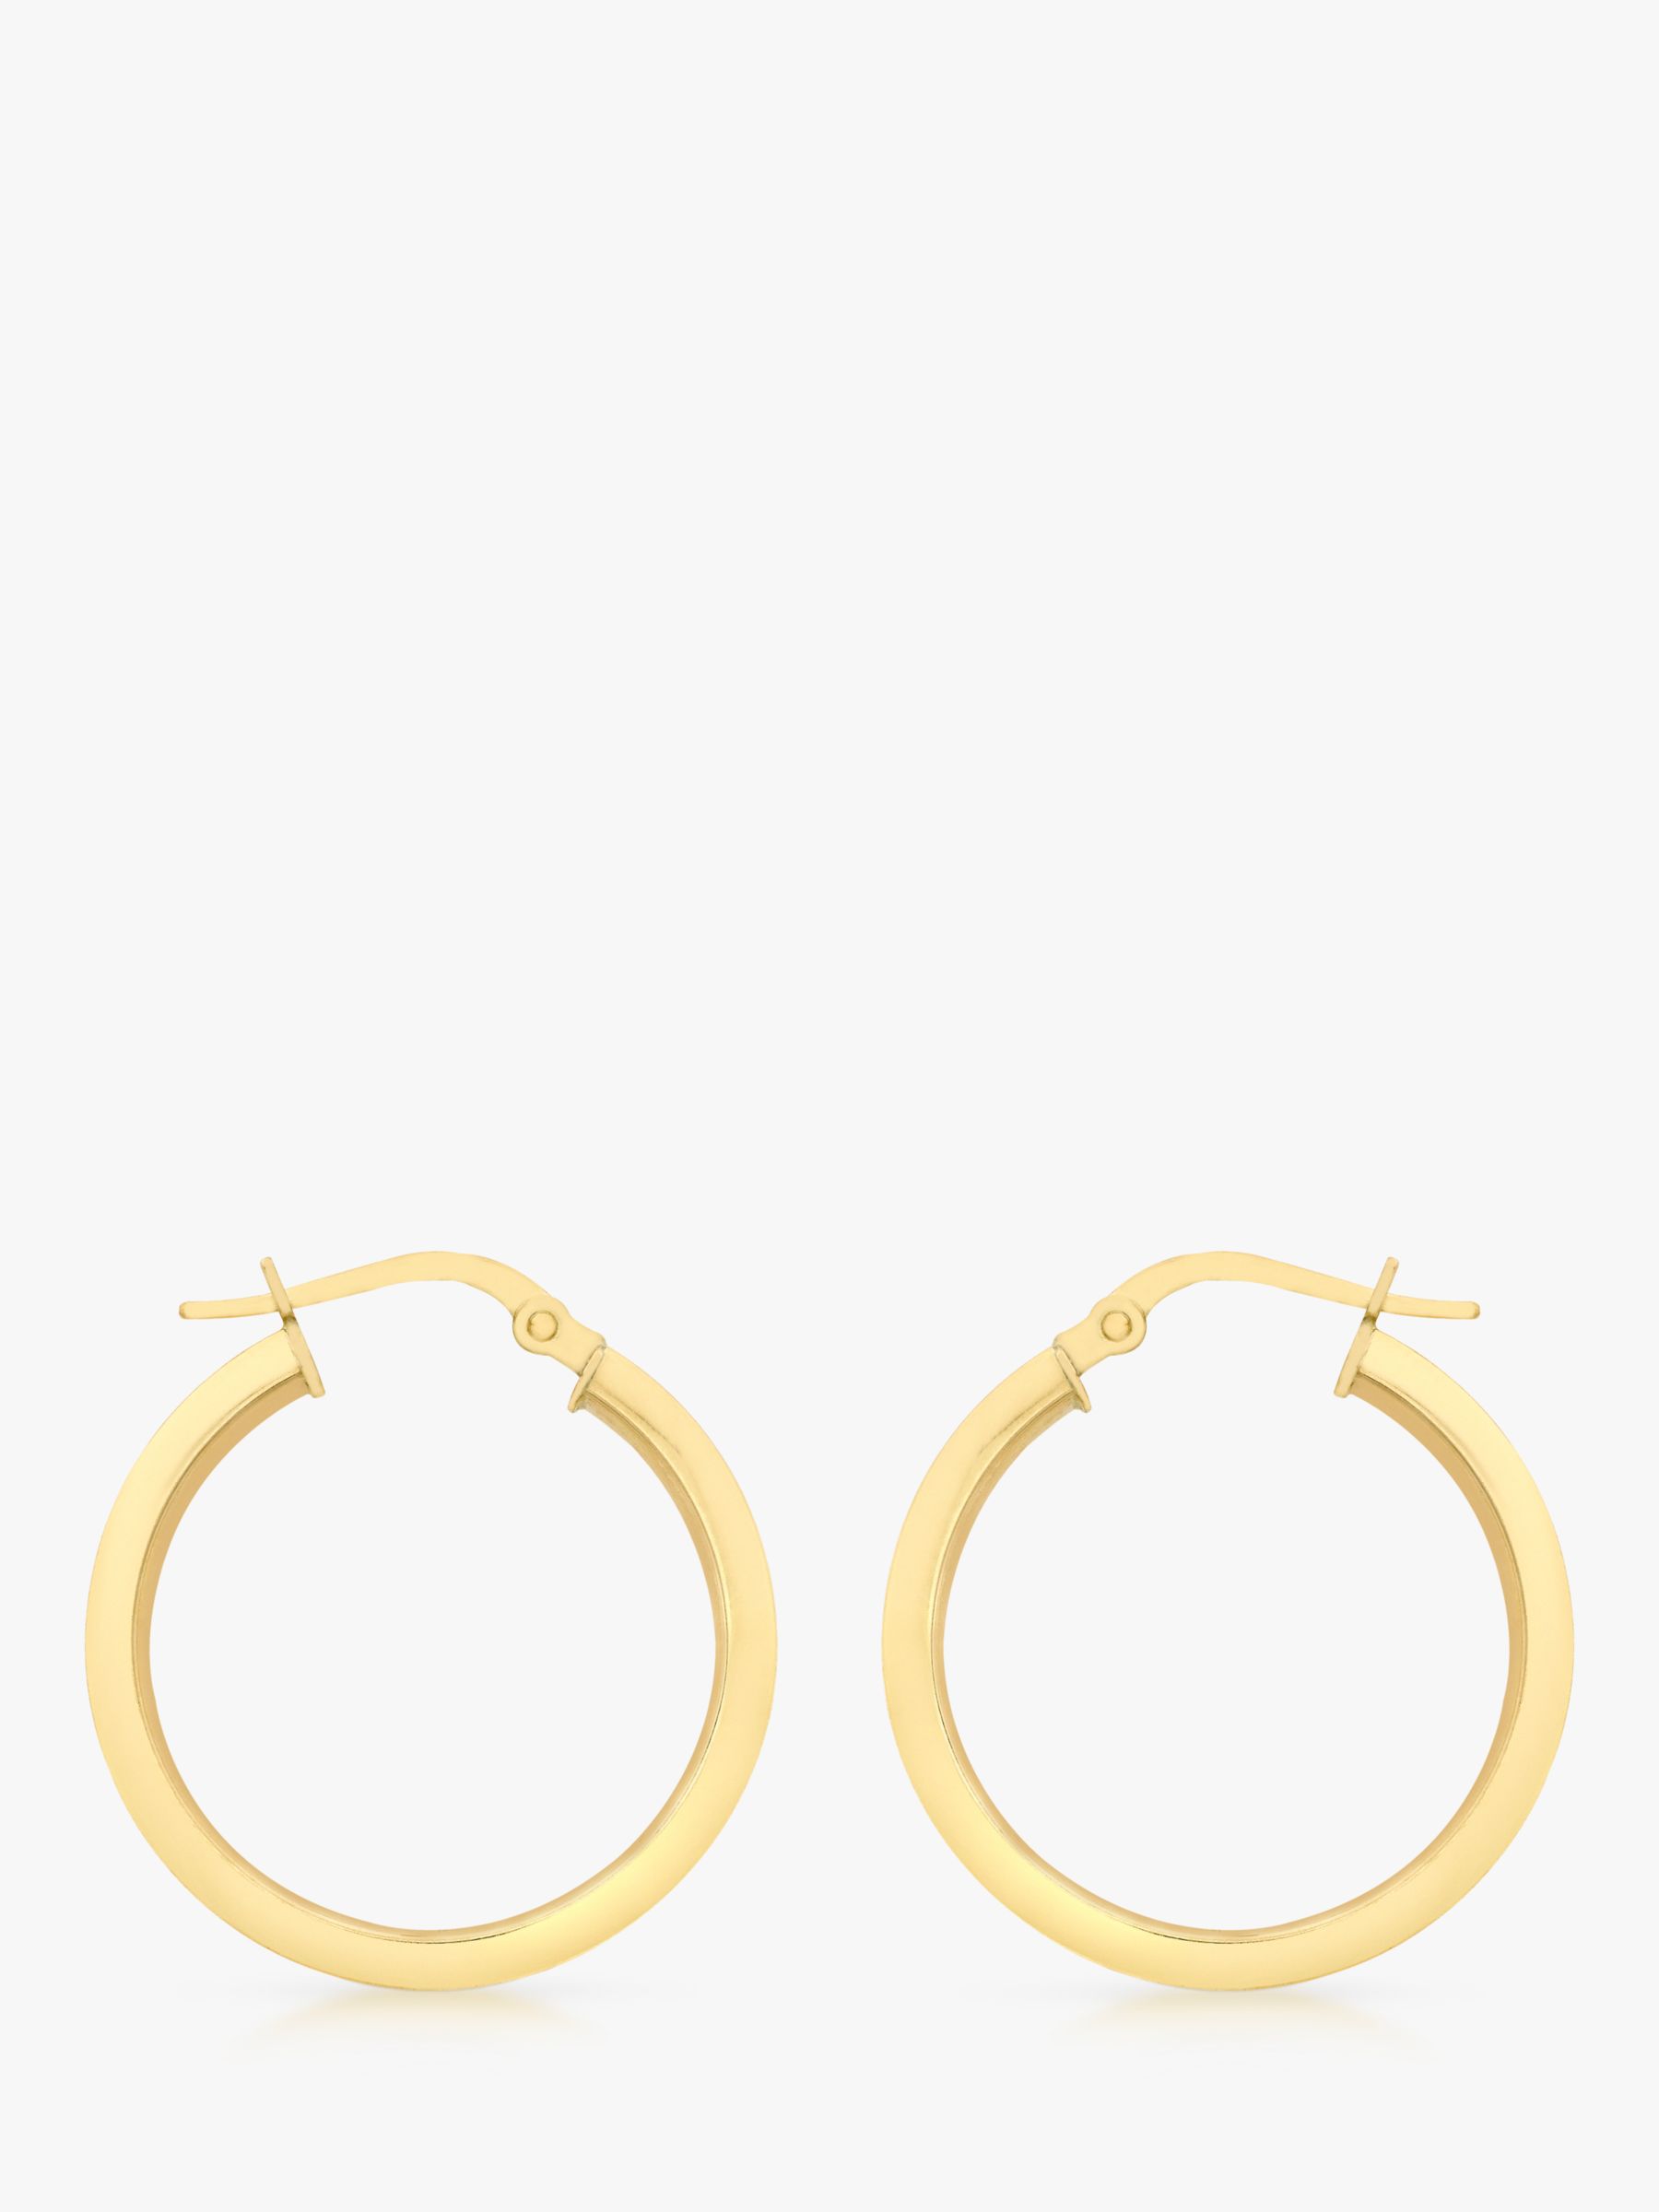 Buy IBB 9ct Yellow Gold Creole Lever Hoop Earrings, Gold Online at johnlewis.com